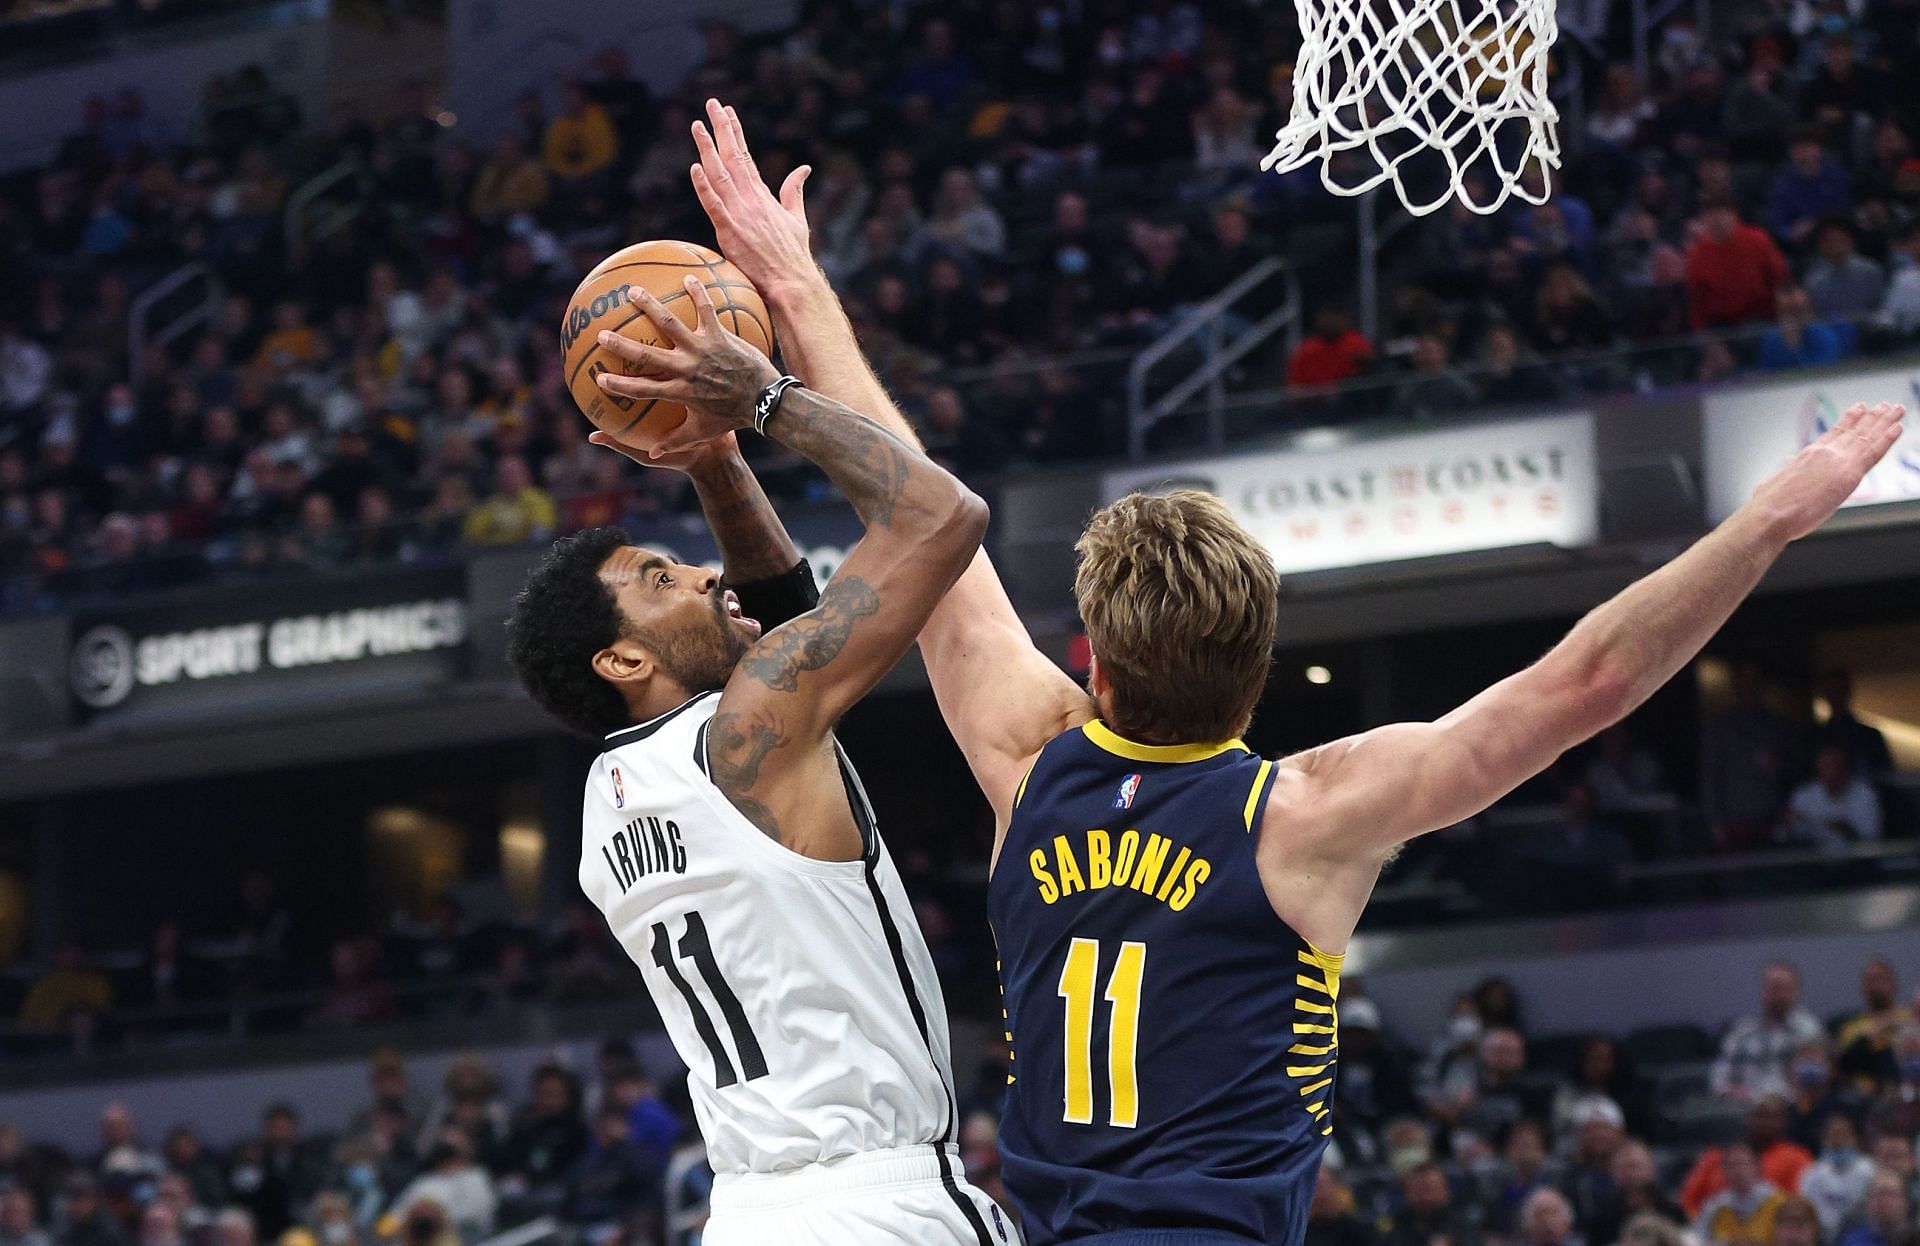 Kyrie Irving of the Brooklyn Nets vs. the Indiana Pacers.